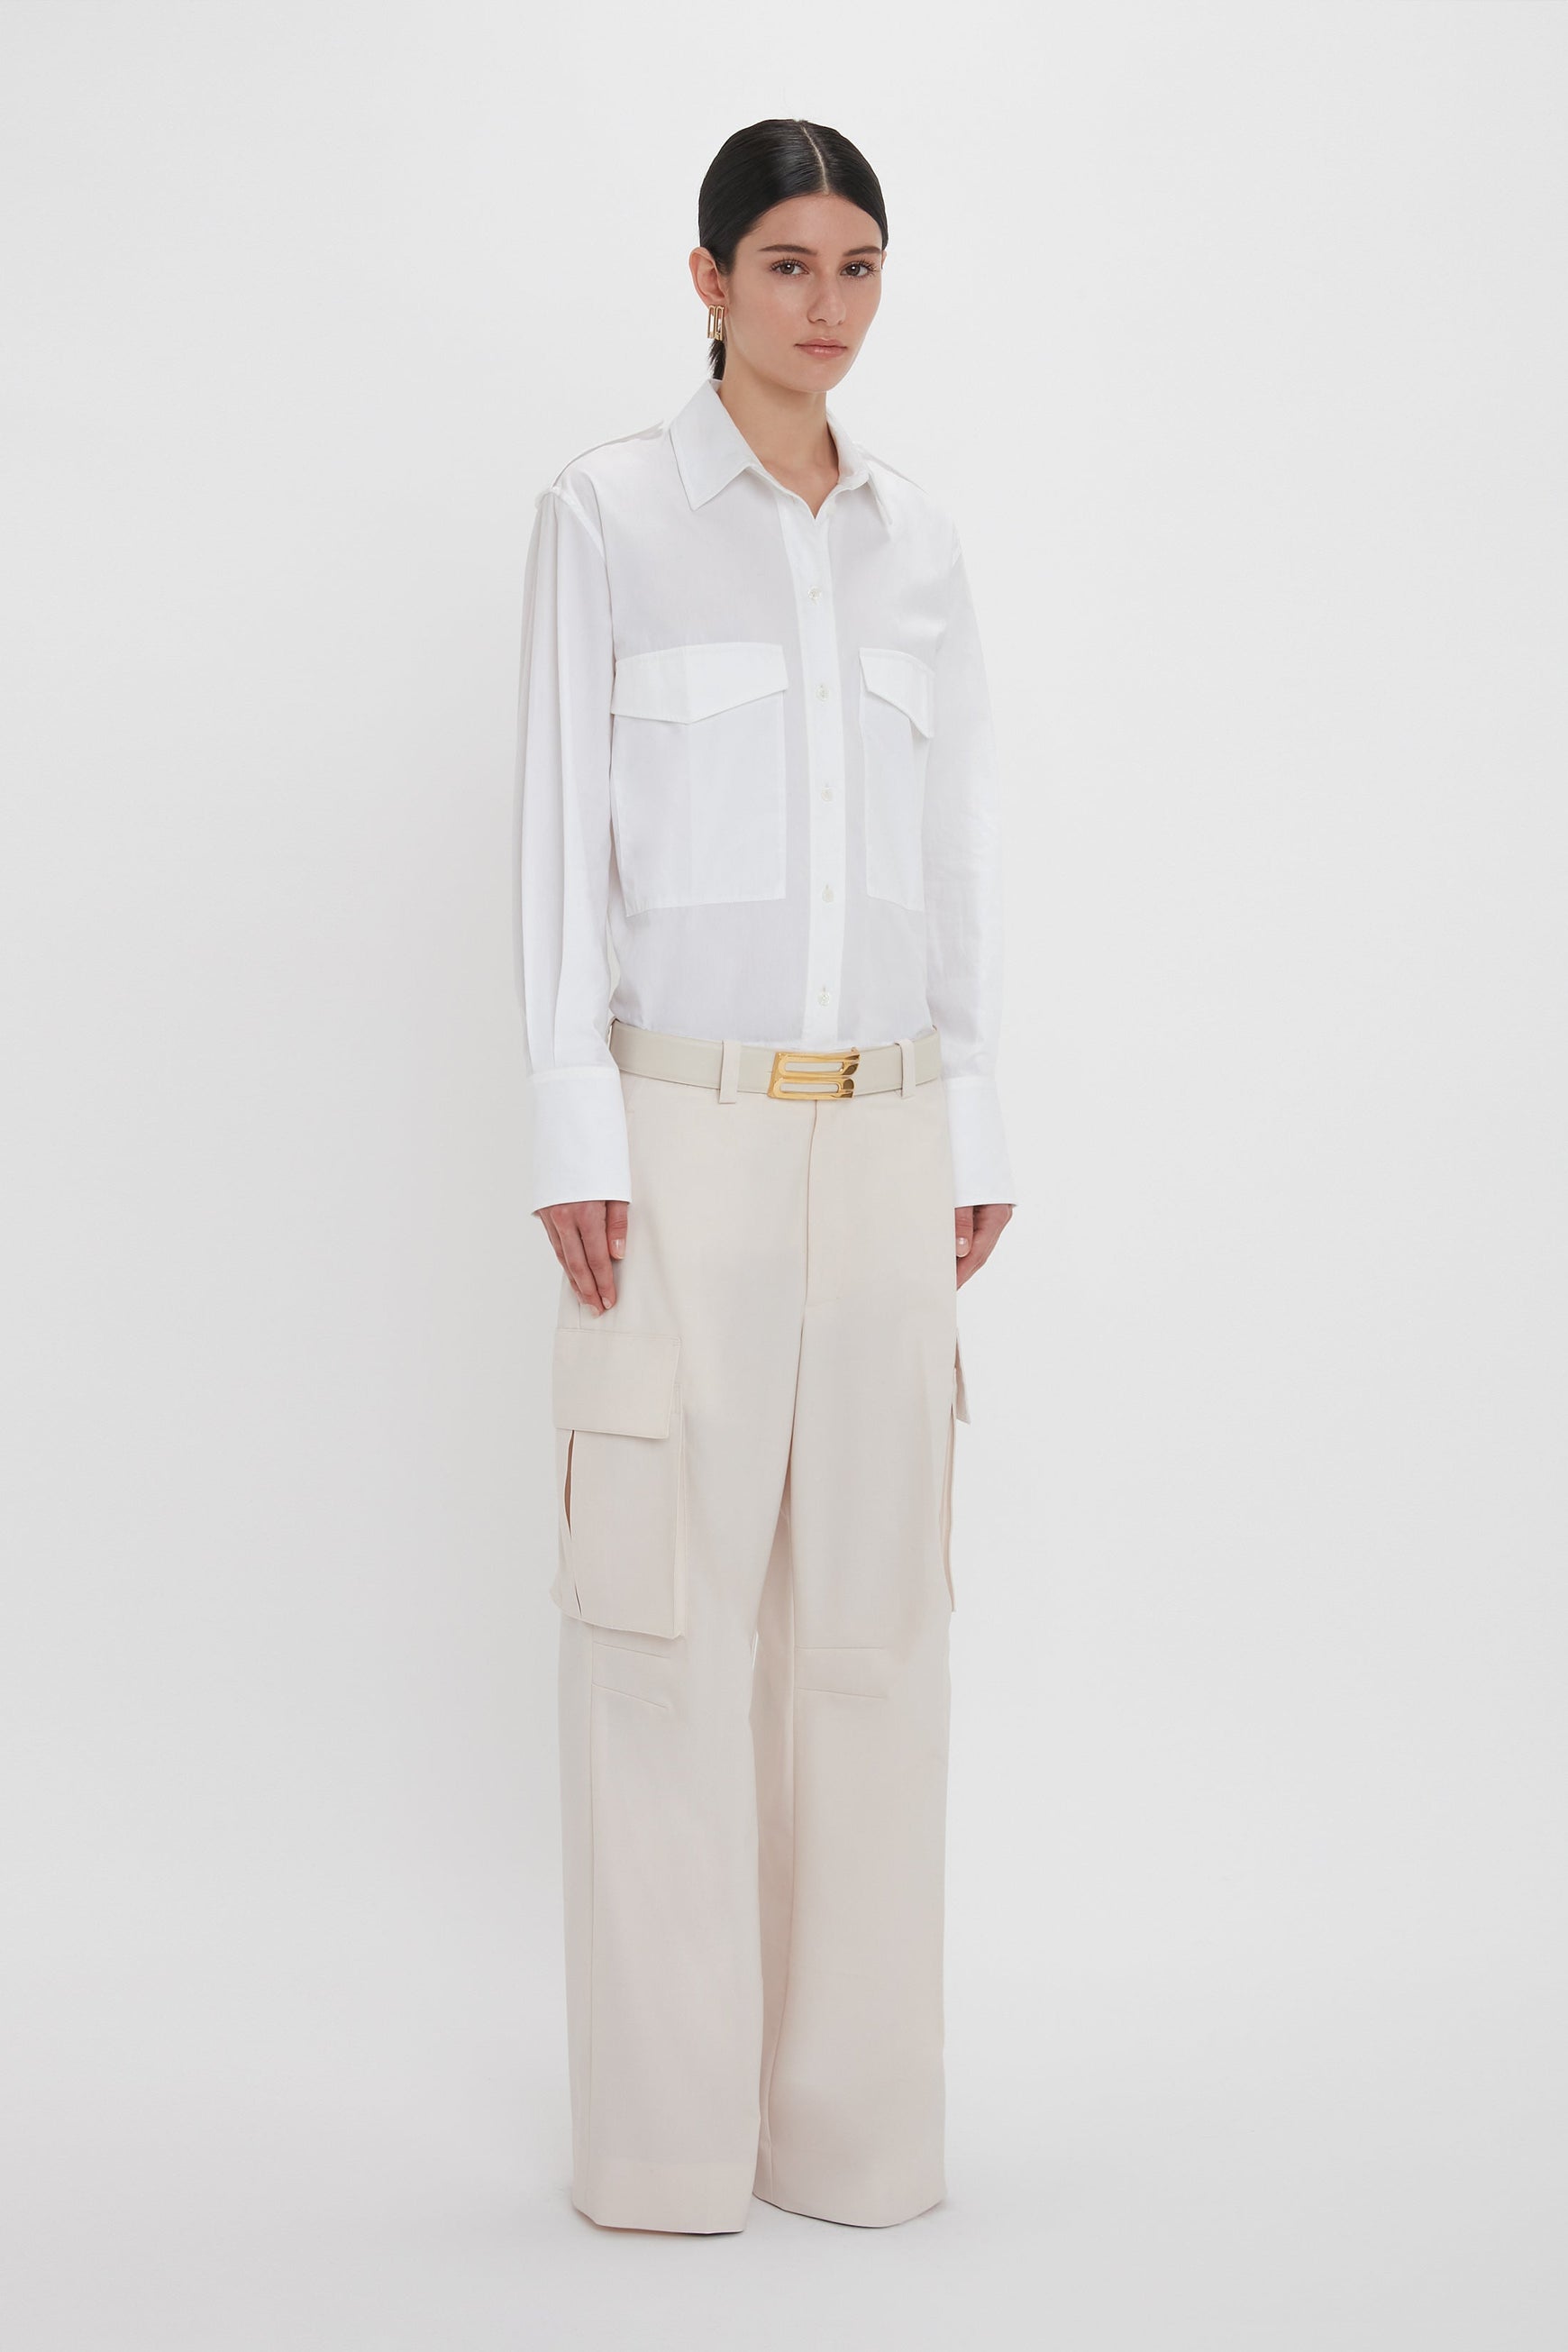 A person stands against a white background wearing a white button-up shirt and Victoria Beckham's Relaxed Cargo Trouser In Bone. Their hands rest by their sides.